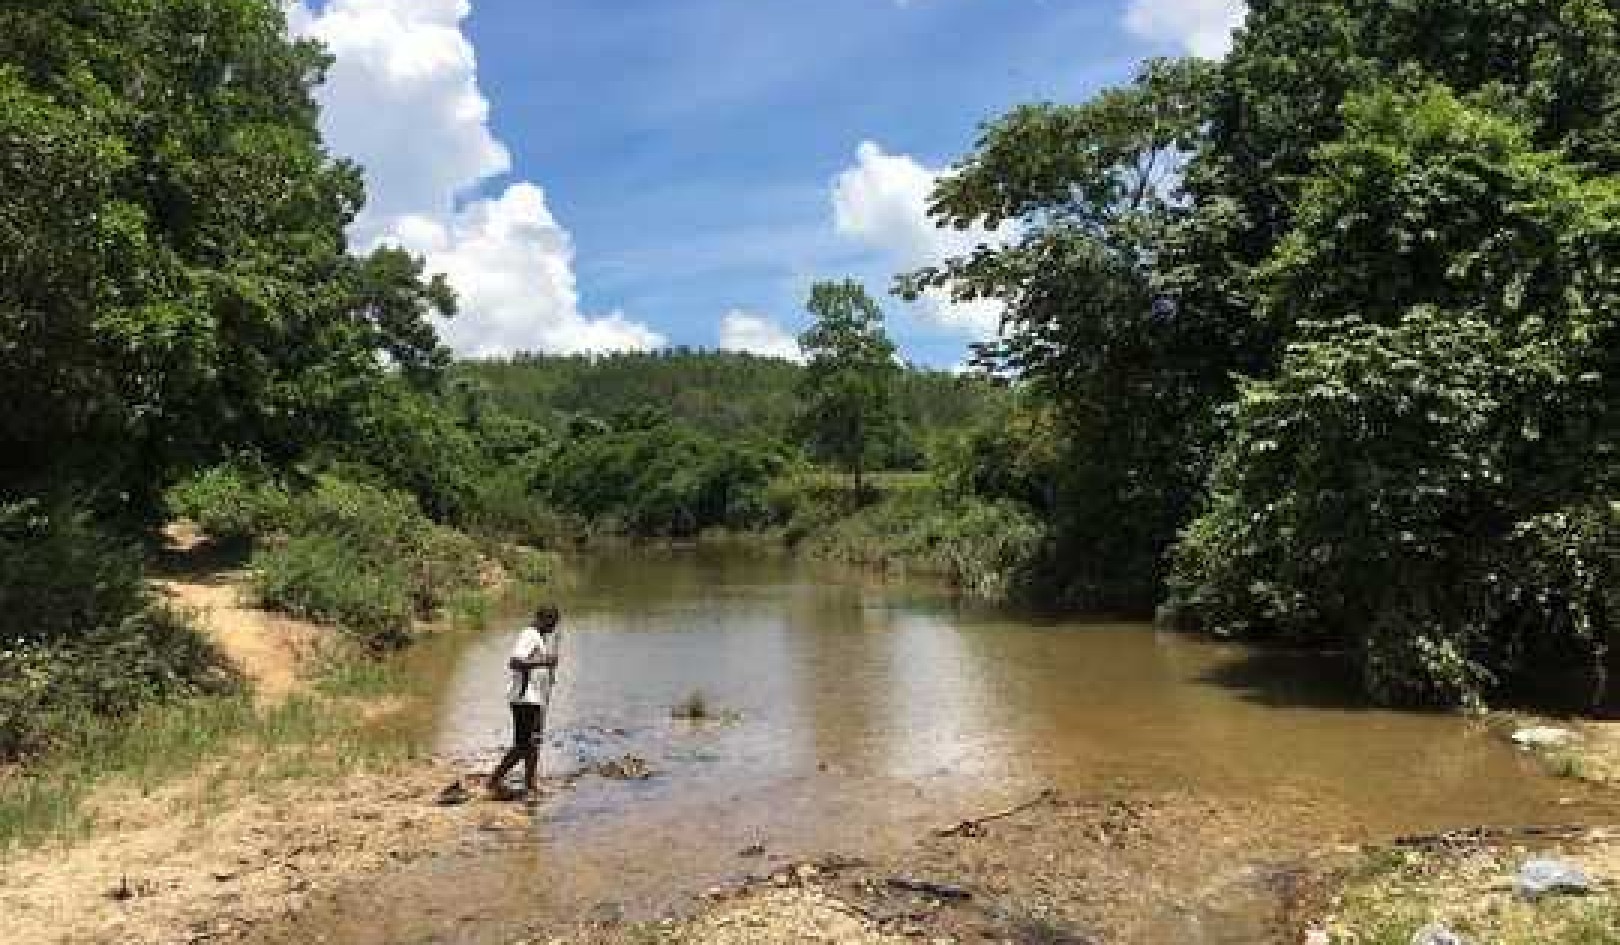 Cuba's Clean Rivers Show The Benefits Of Reducing Nutrient Pollution